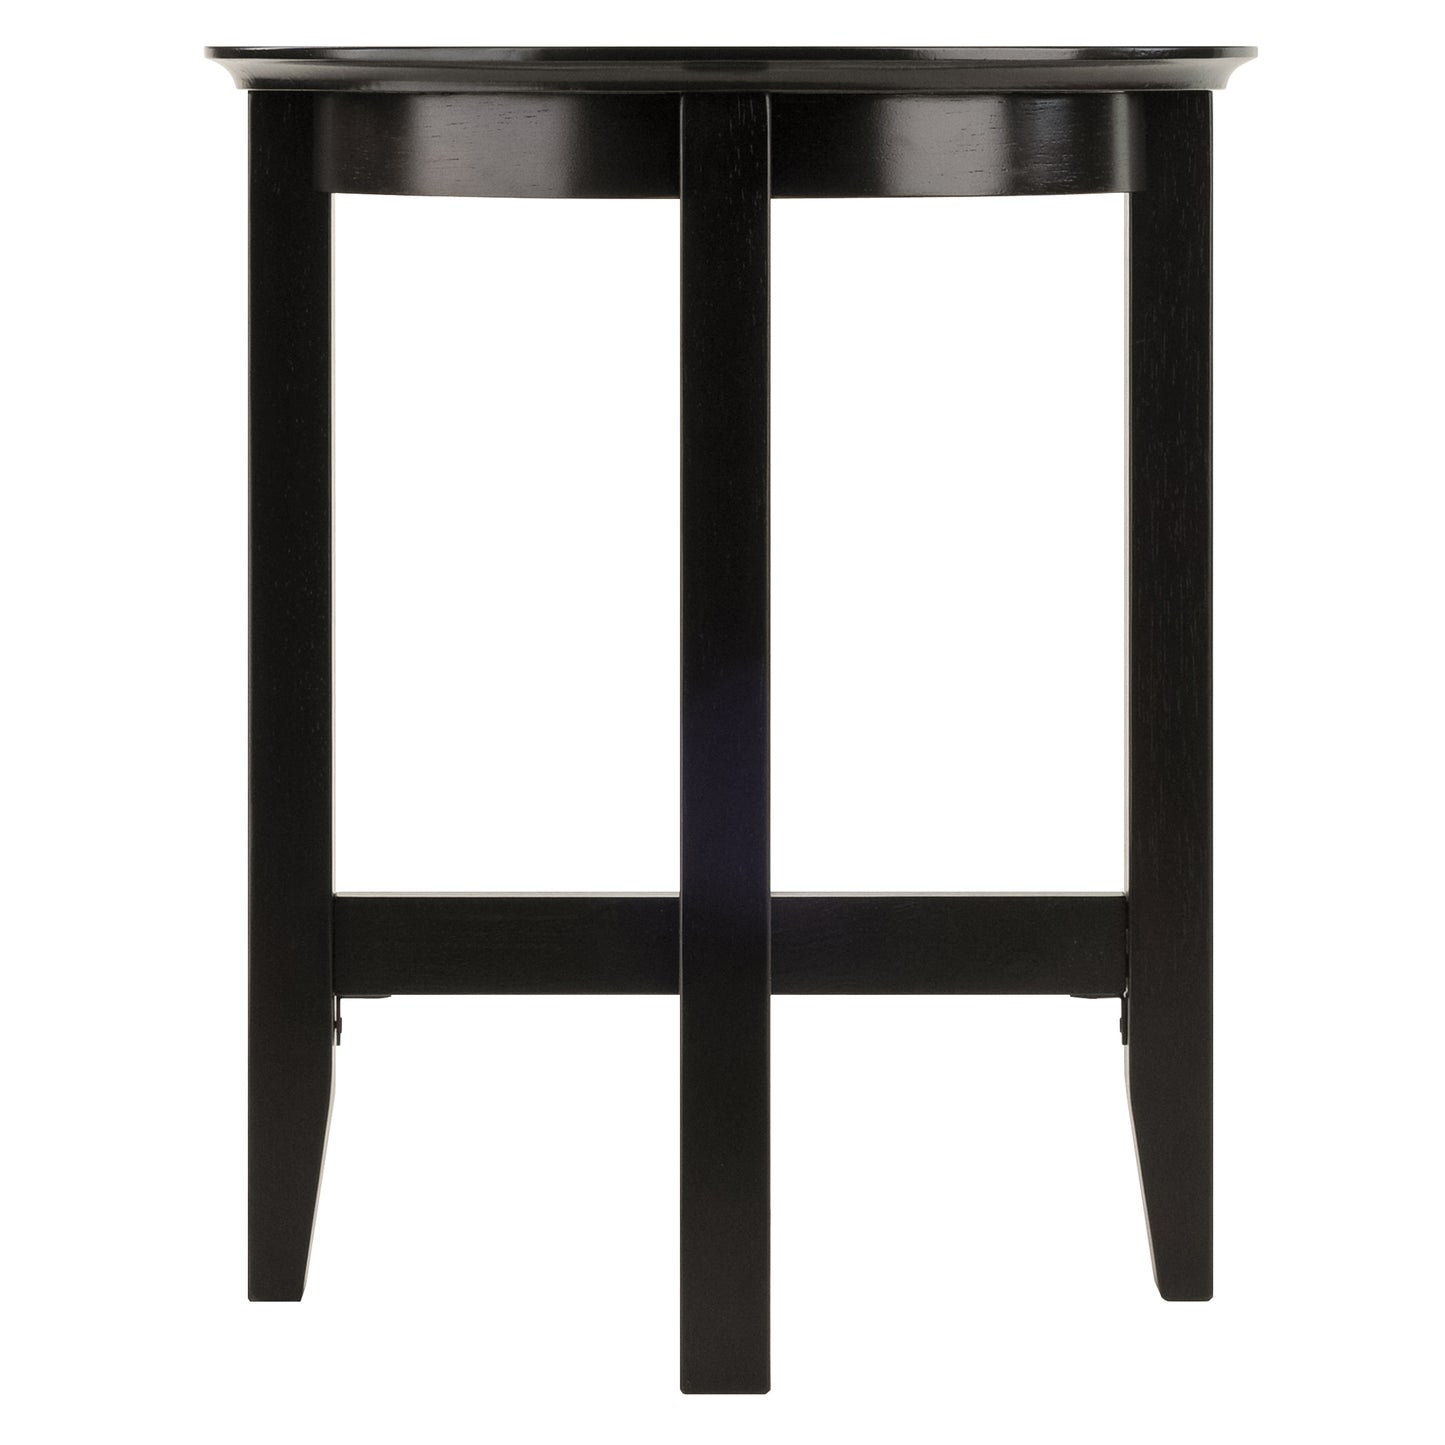 Toby Round Accent End Table, Espresso A